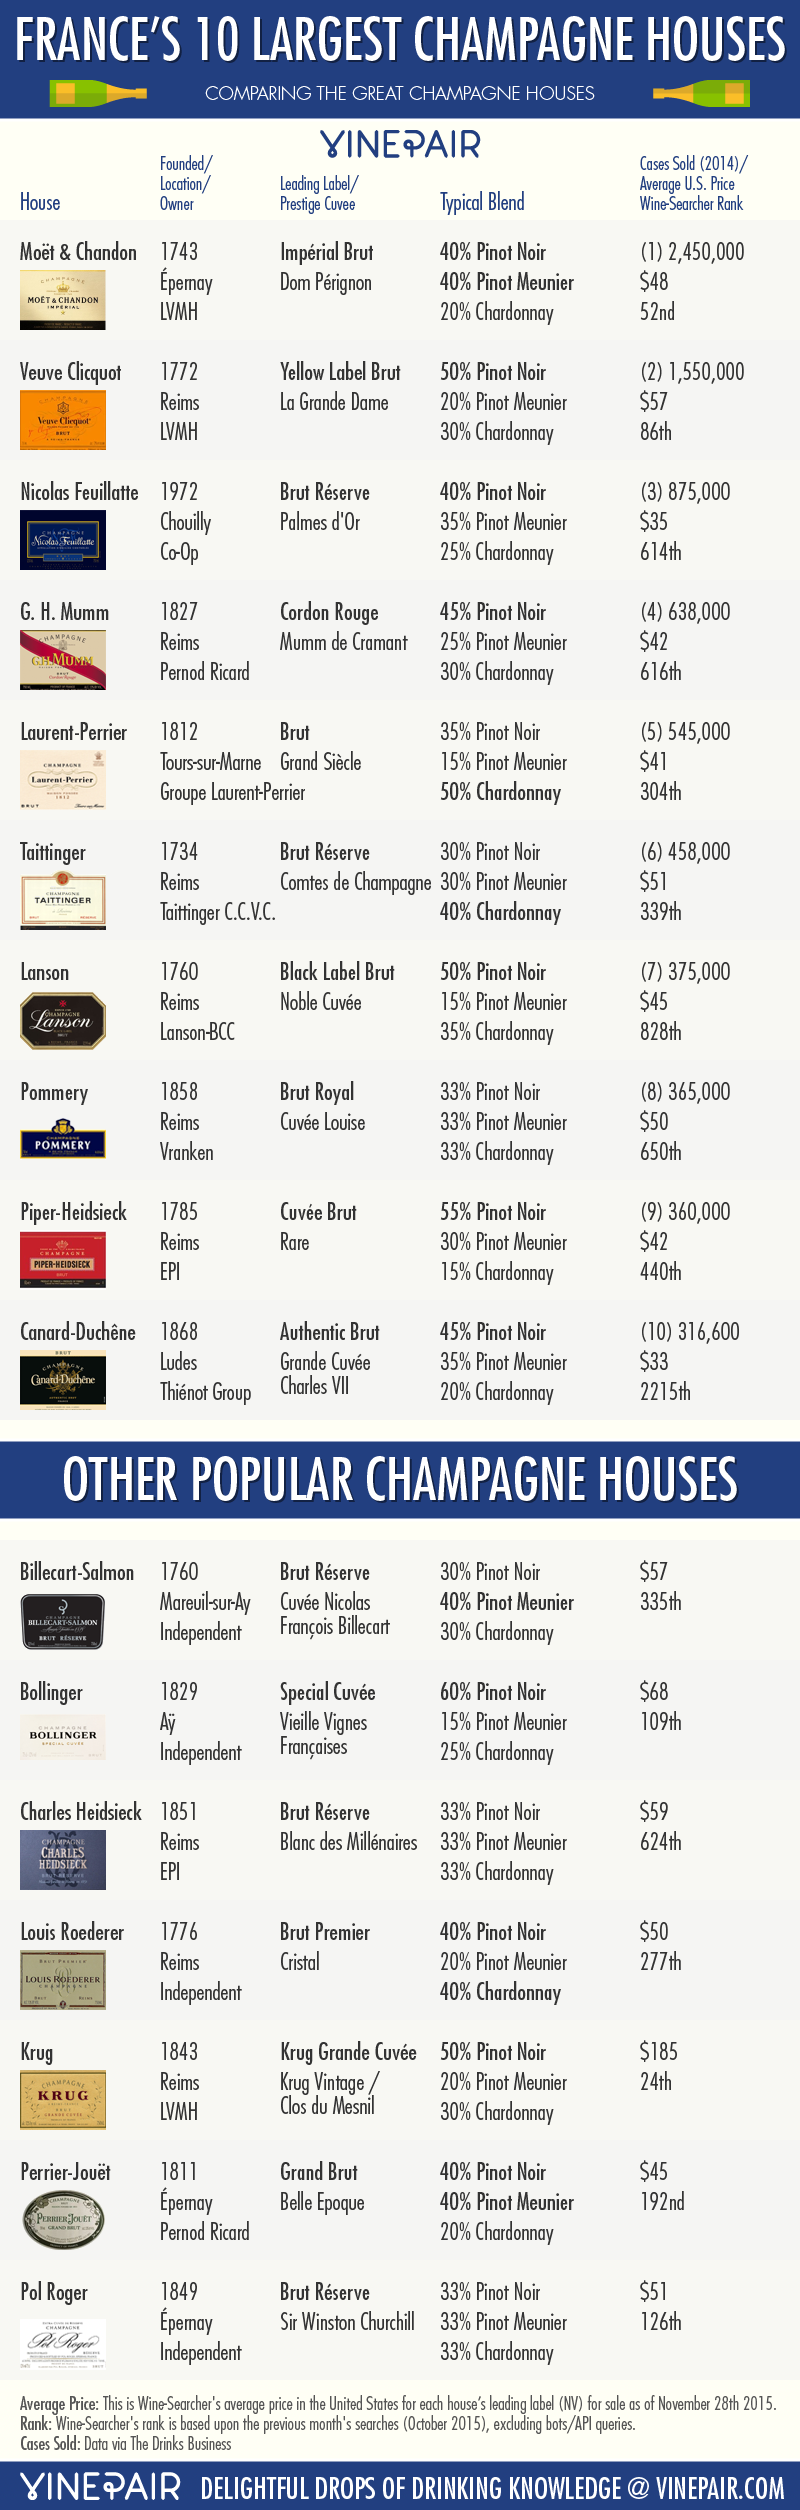 Comparing France's 10 Largest Champagne Houses